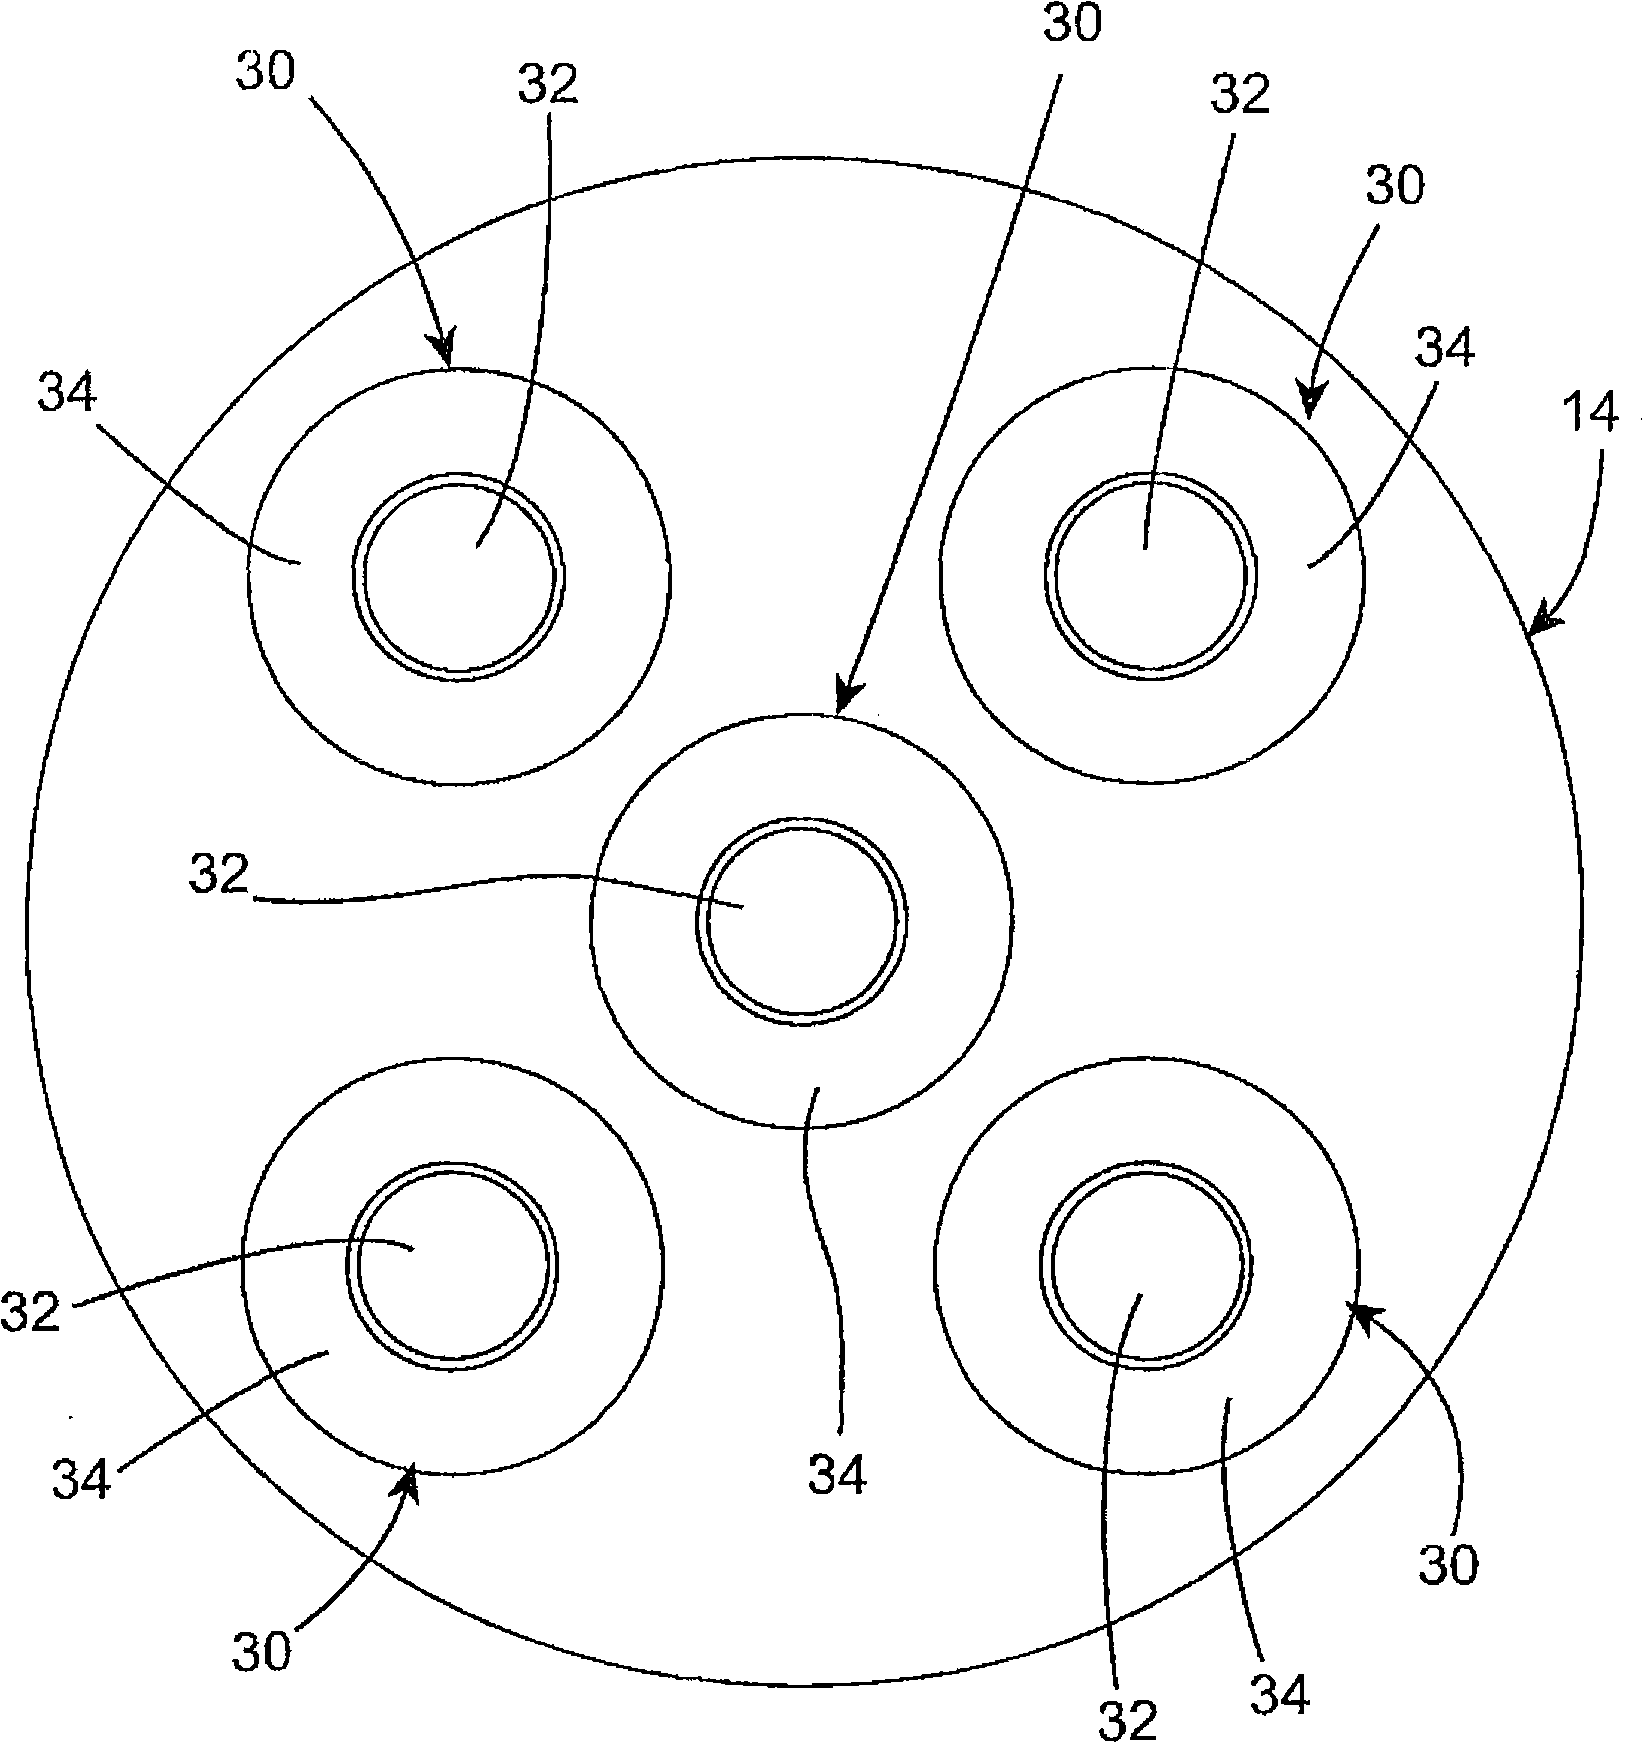 Method for the controlled purging of the fuel feeding system in the combustor of a gas turbine engine